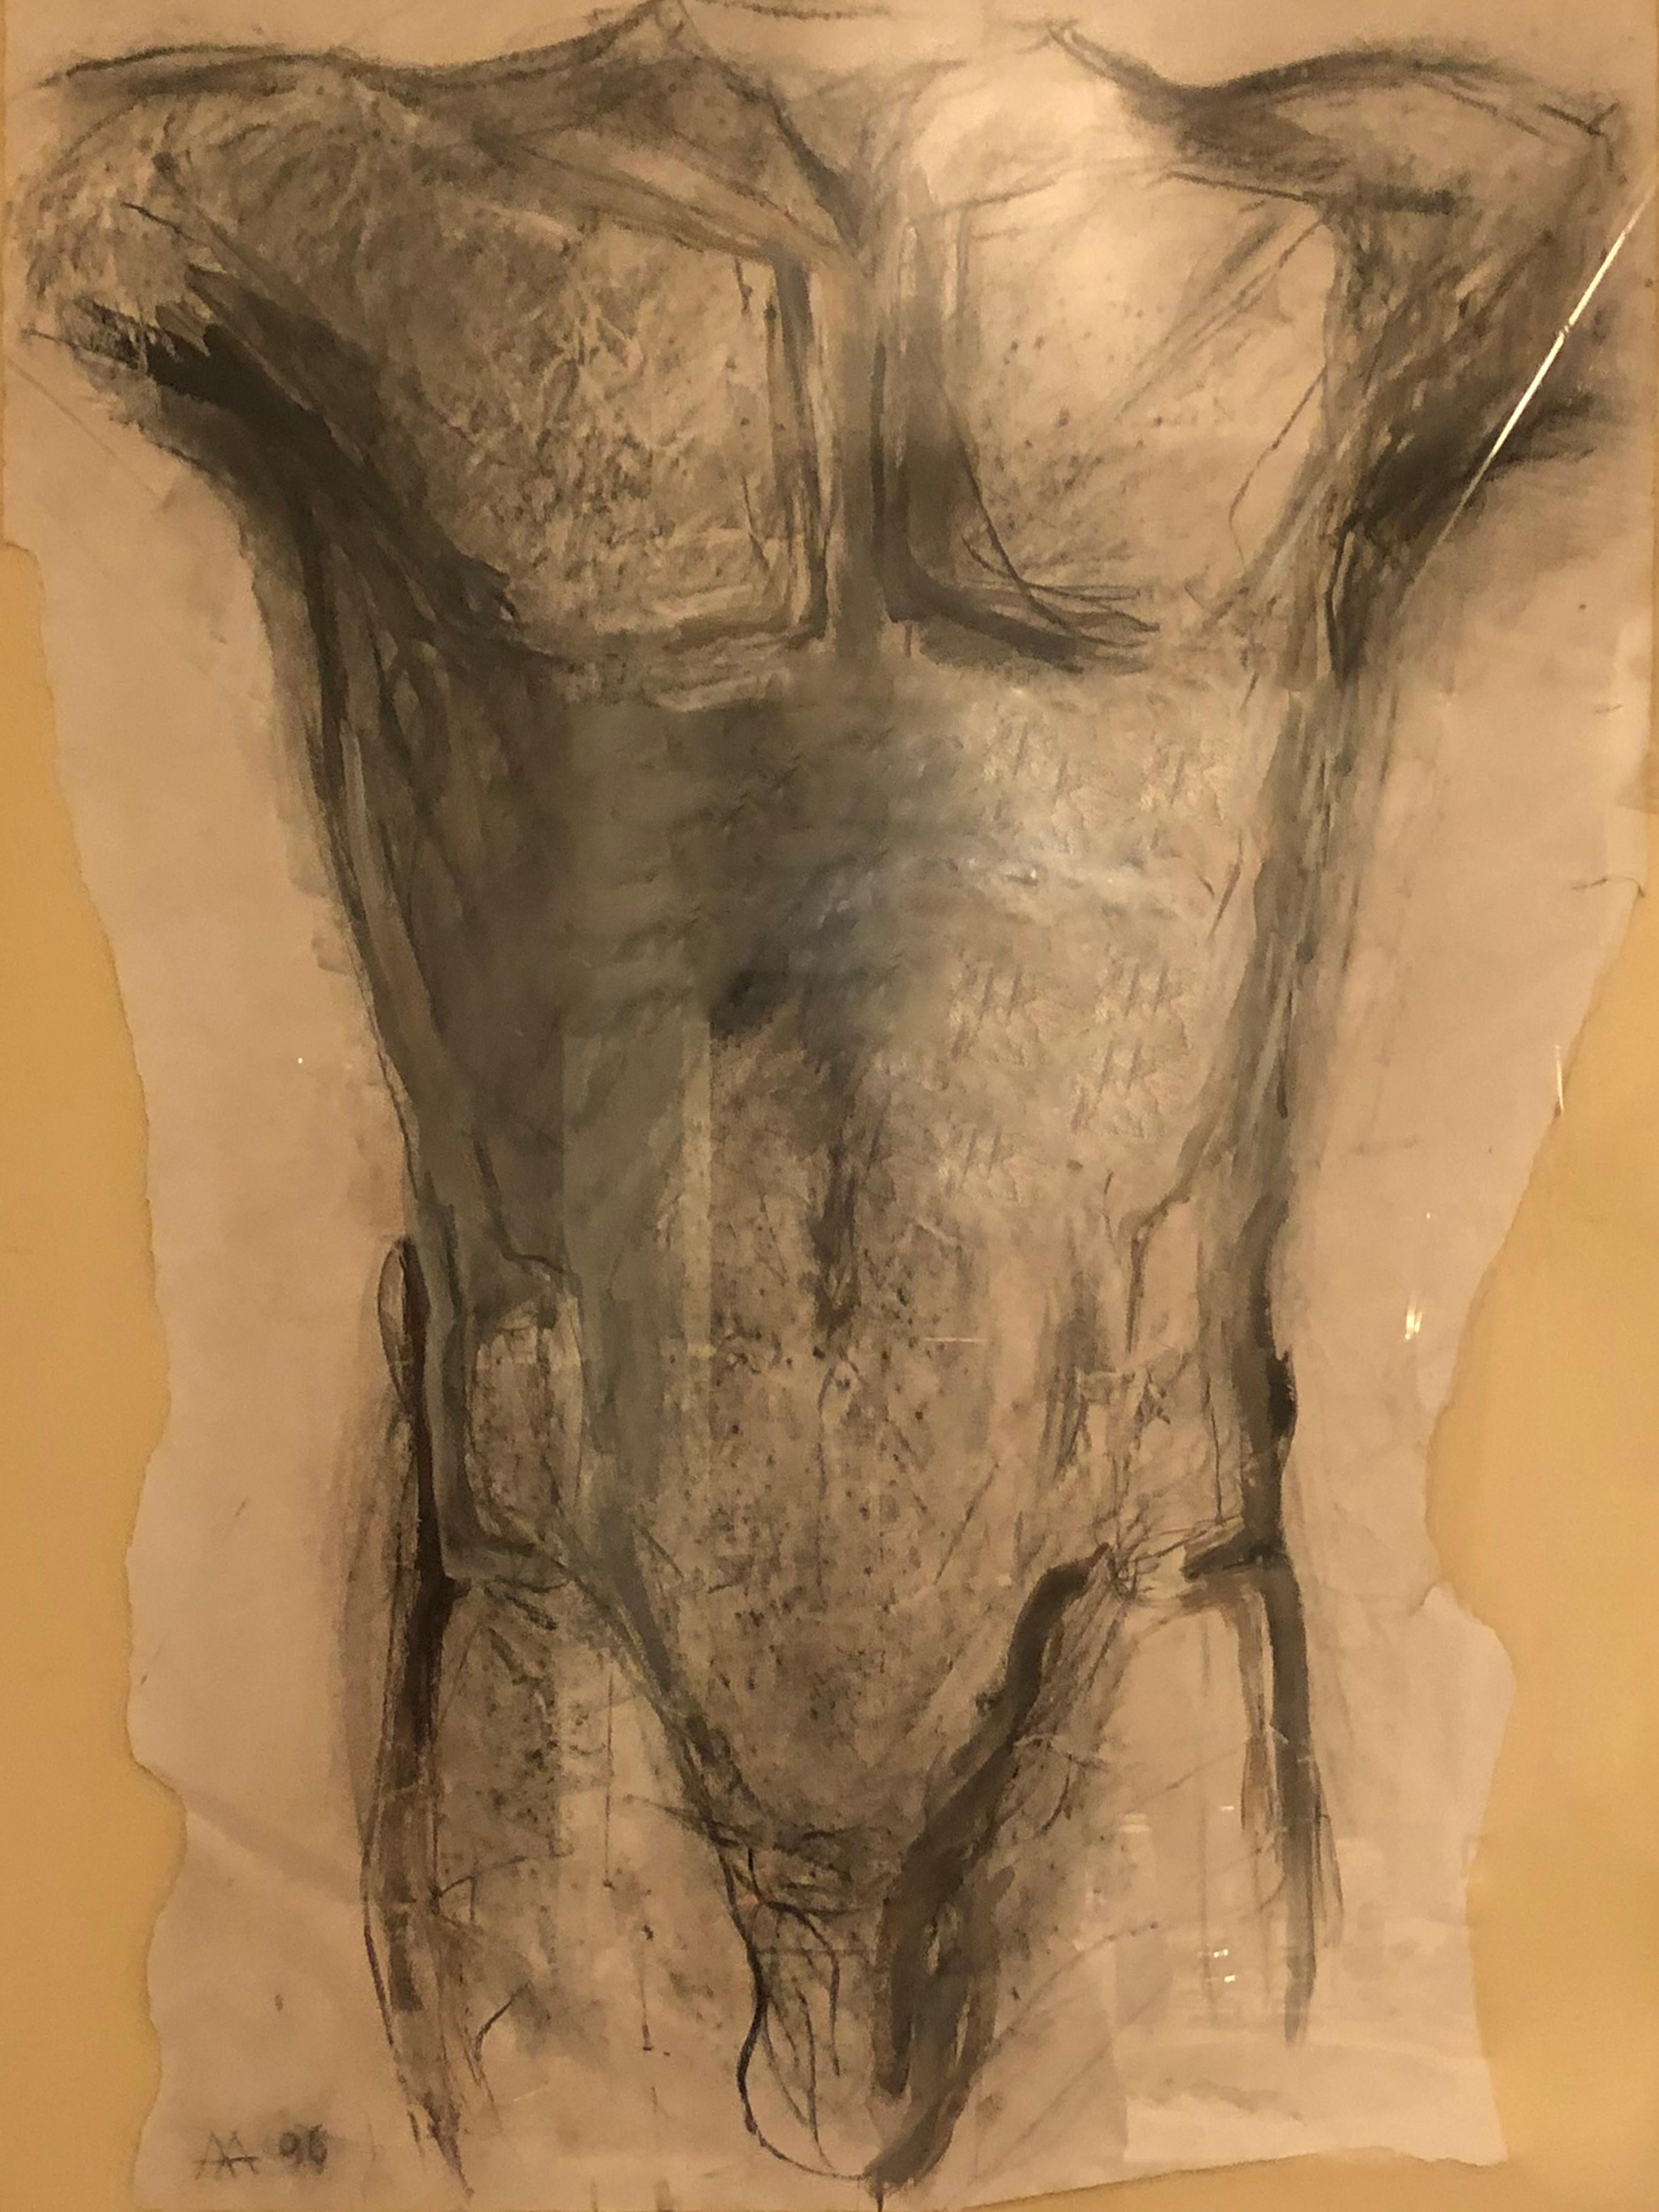 Framed drawing of a Torso by Greek born artist Alexandra Athanassiades (b. 1961). Composition: Charcoal and gouache on distressed paper.

Property from esteemed interior designer Juan Montoya. Juan Montoya is one of the most acclaimed and prolific